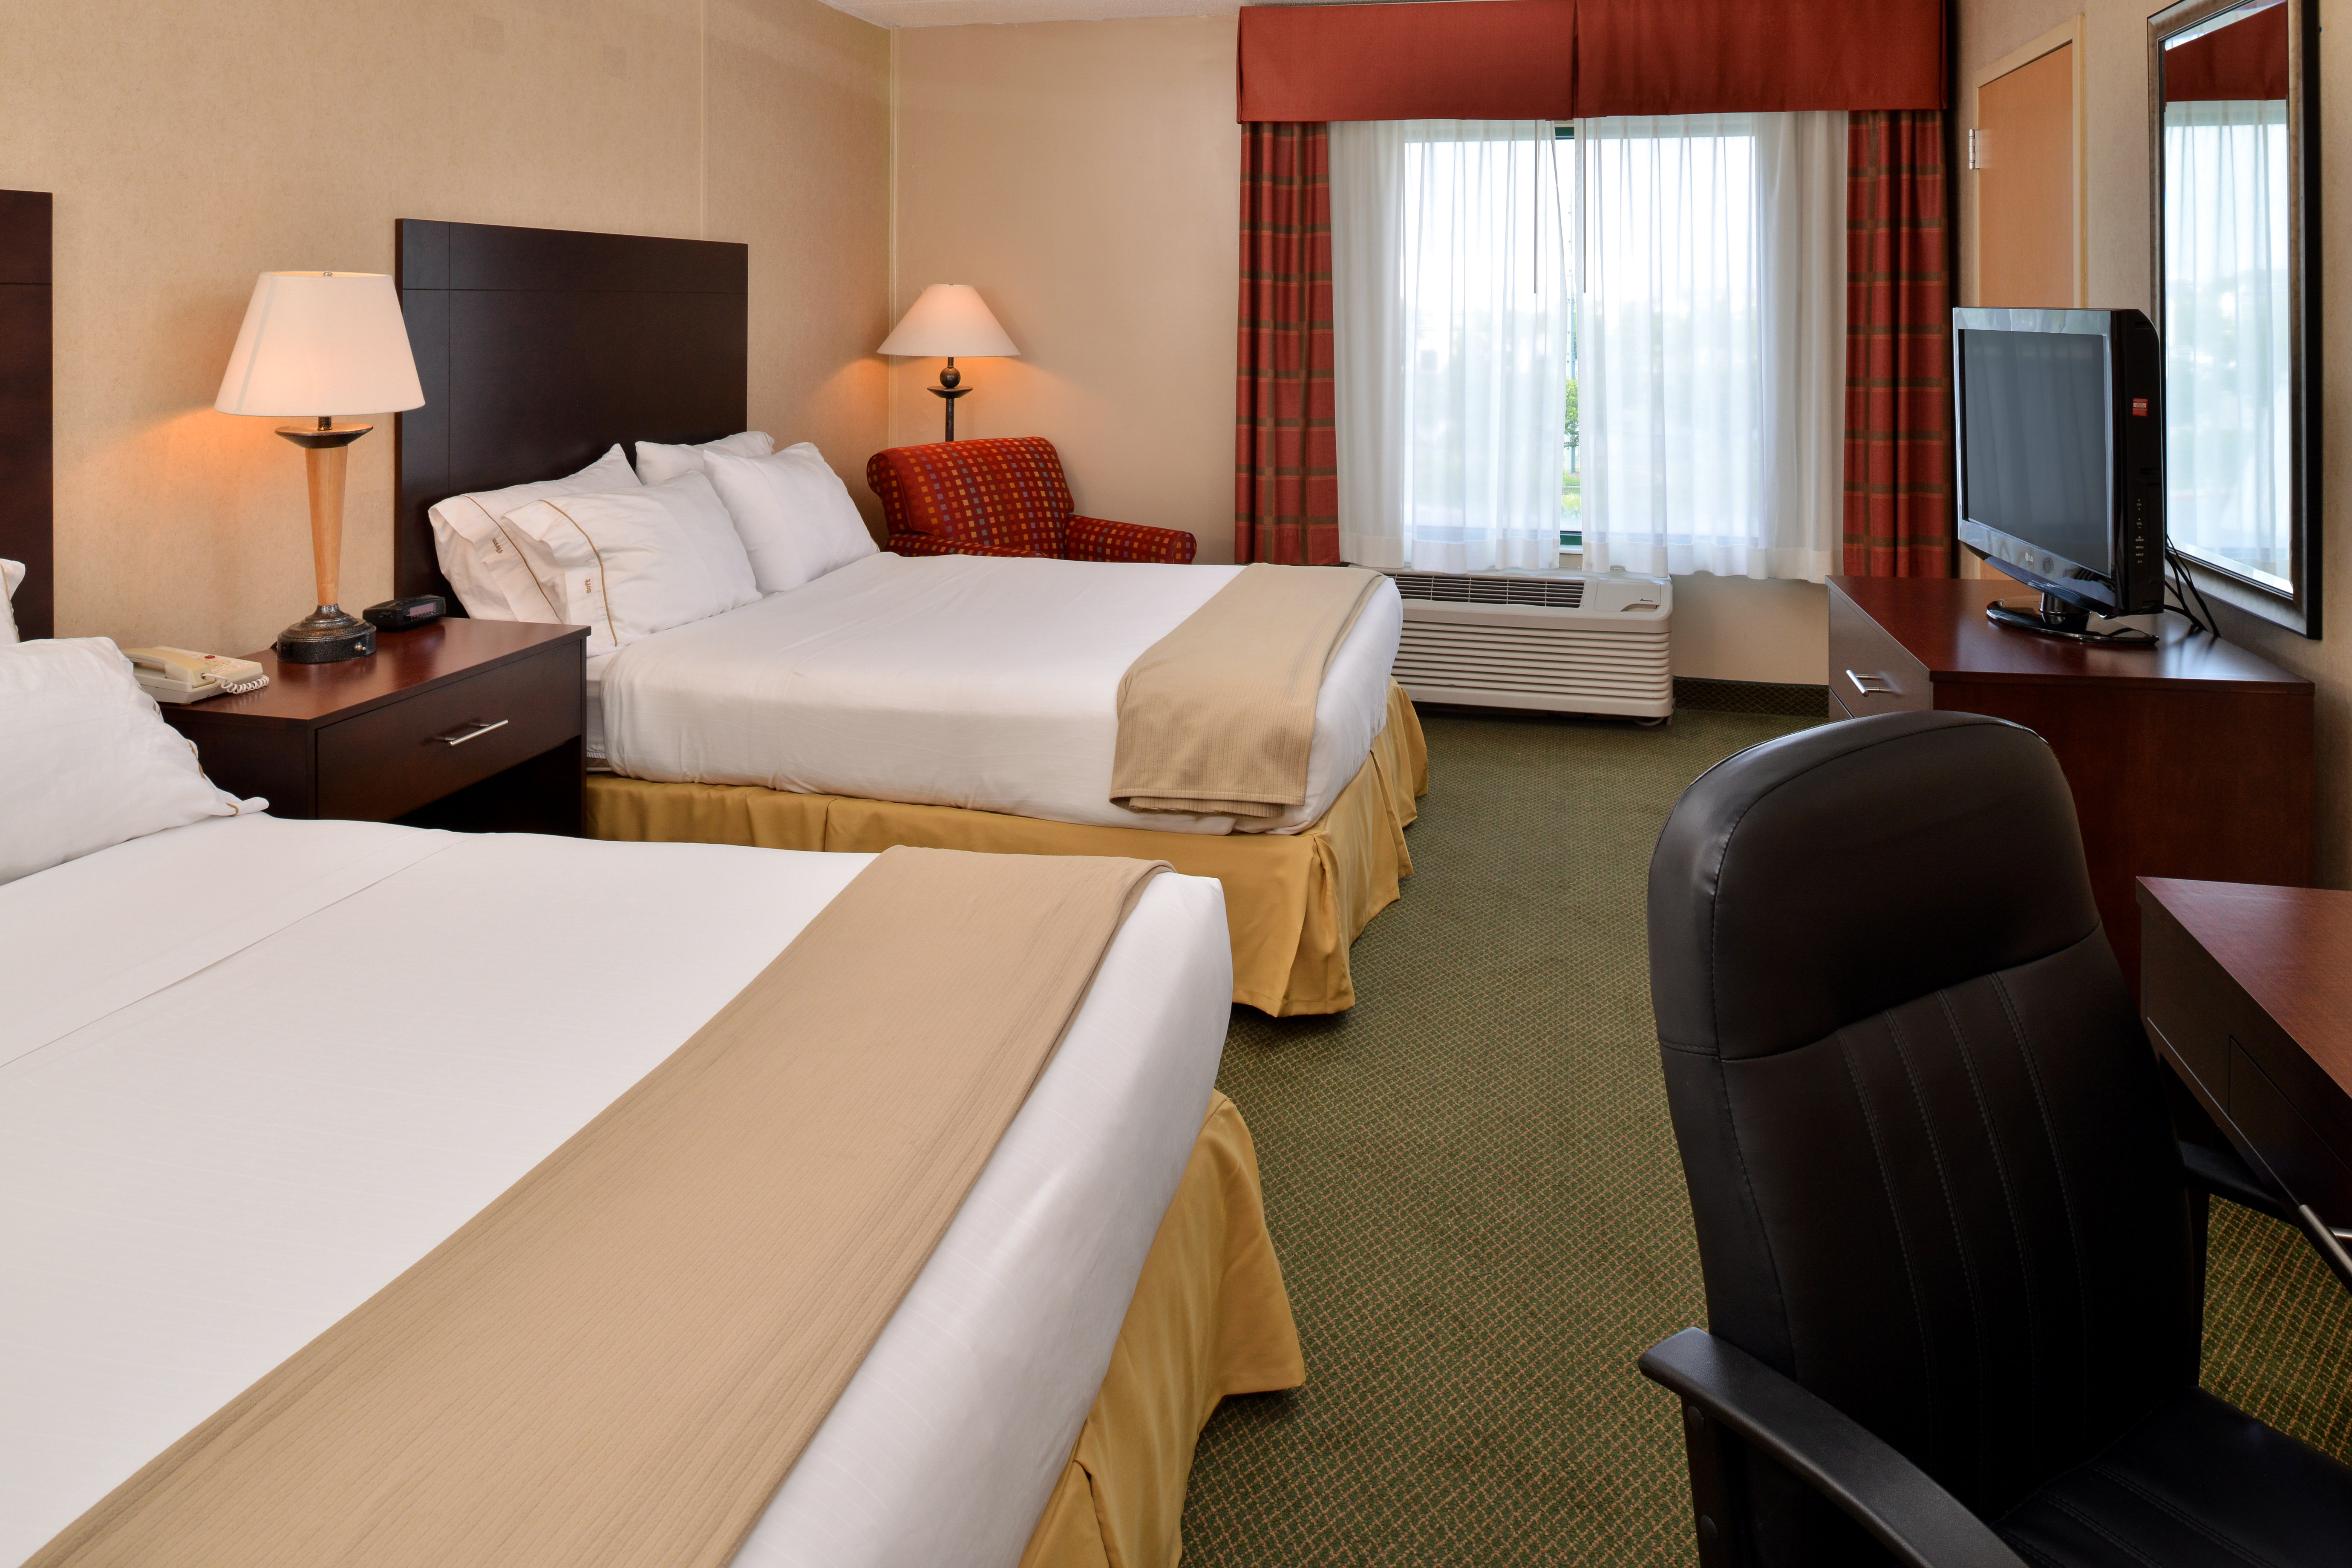 Relax and enjoy our newly renovated room with two queen beds